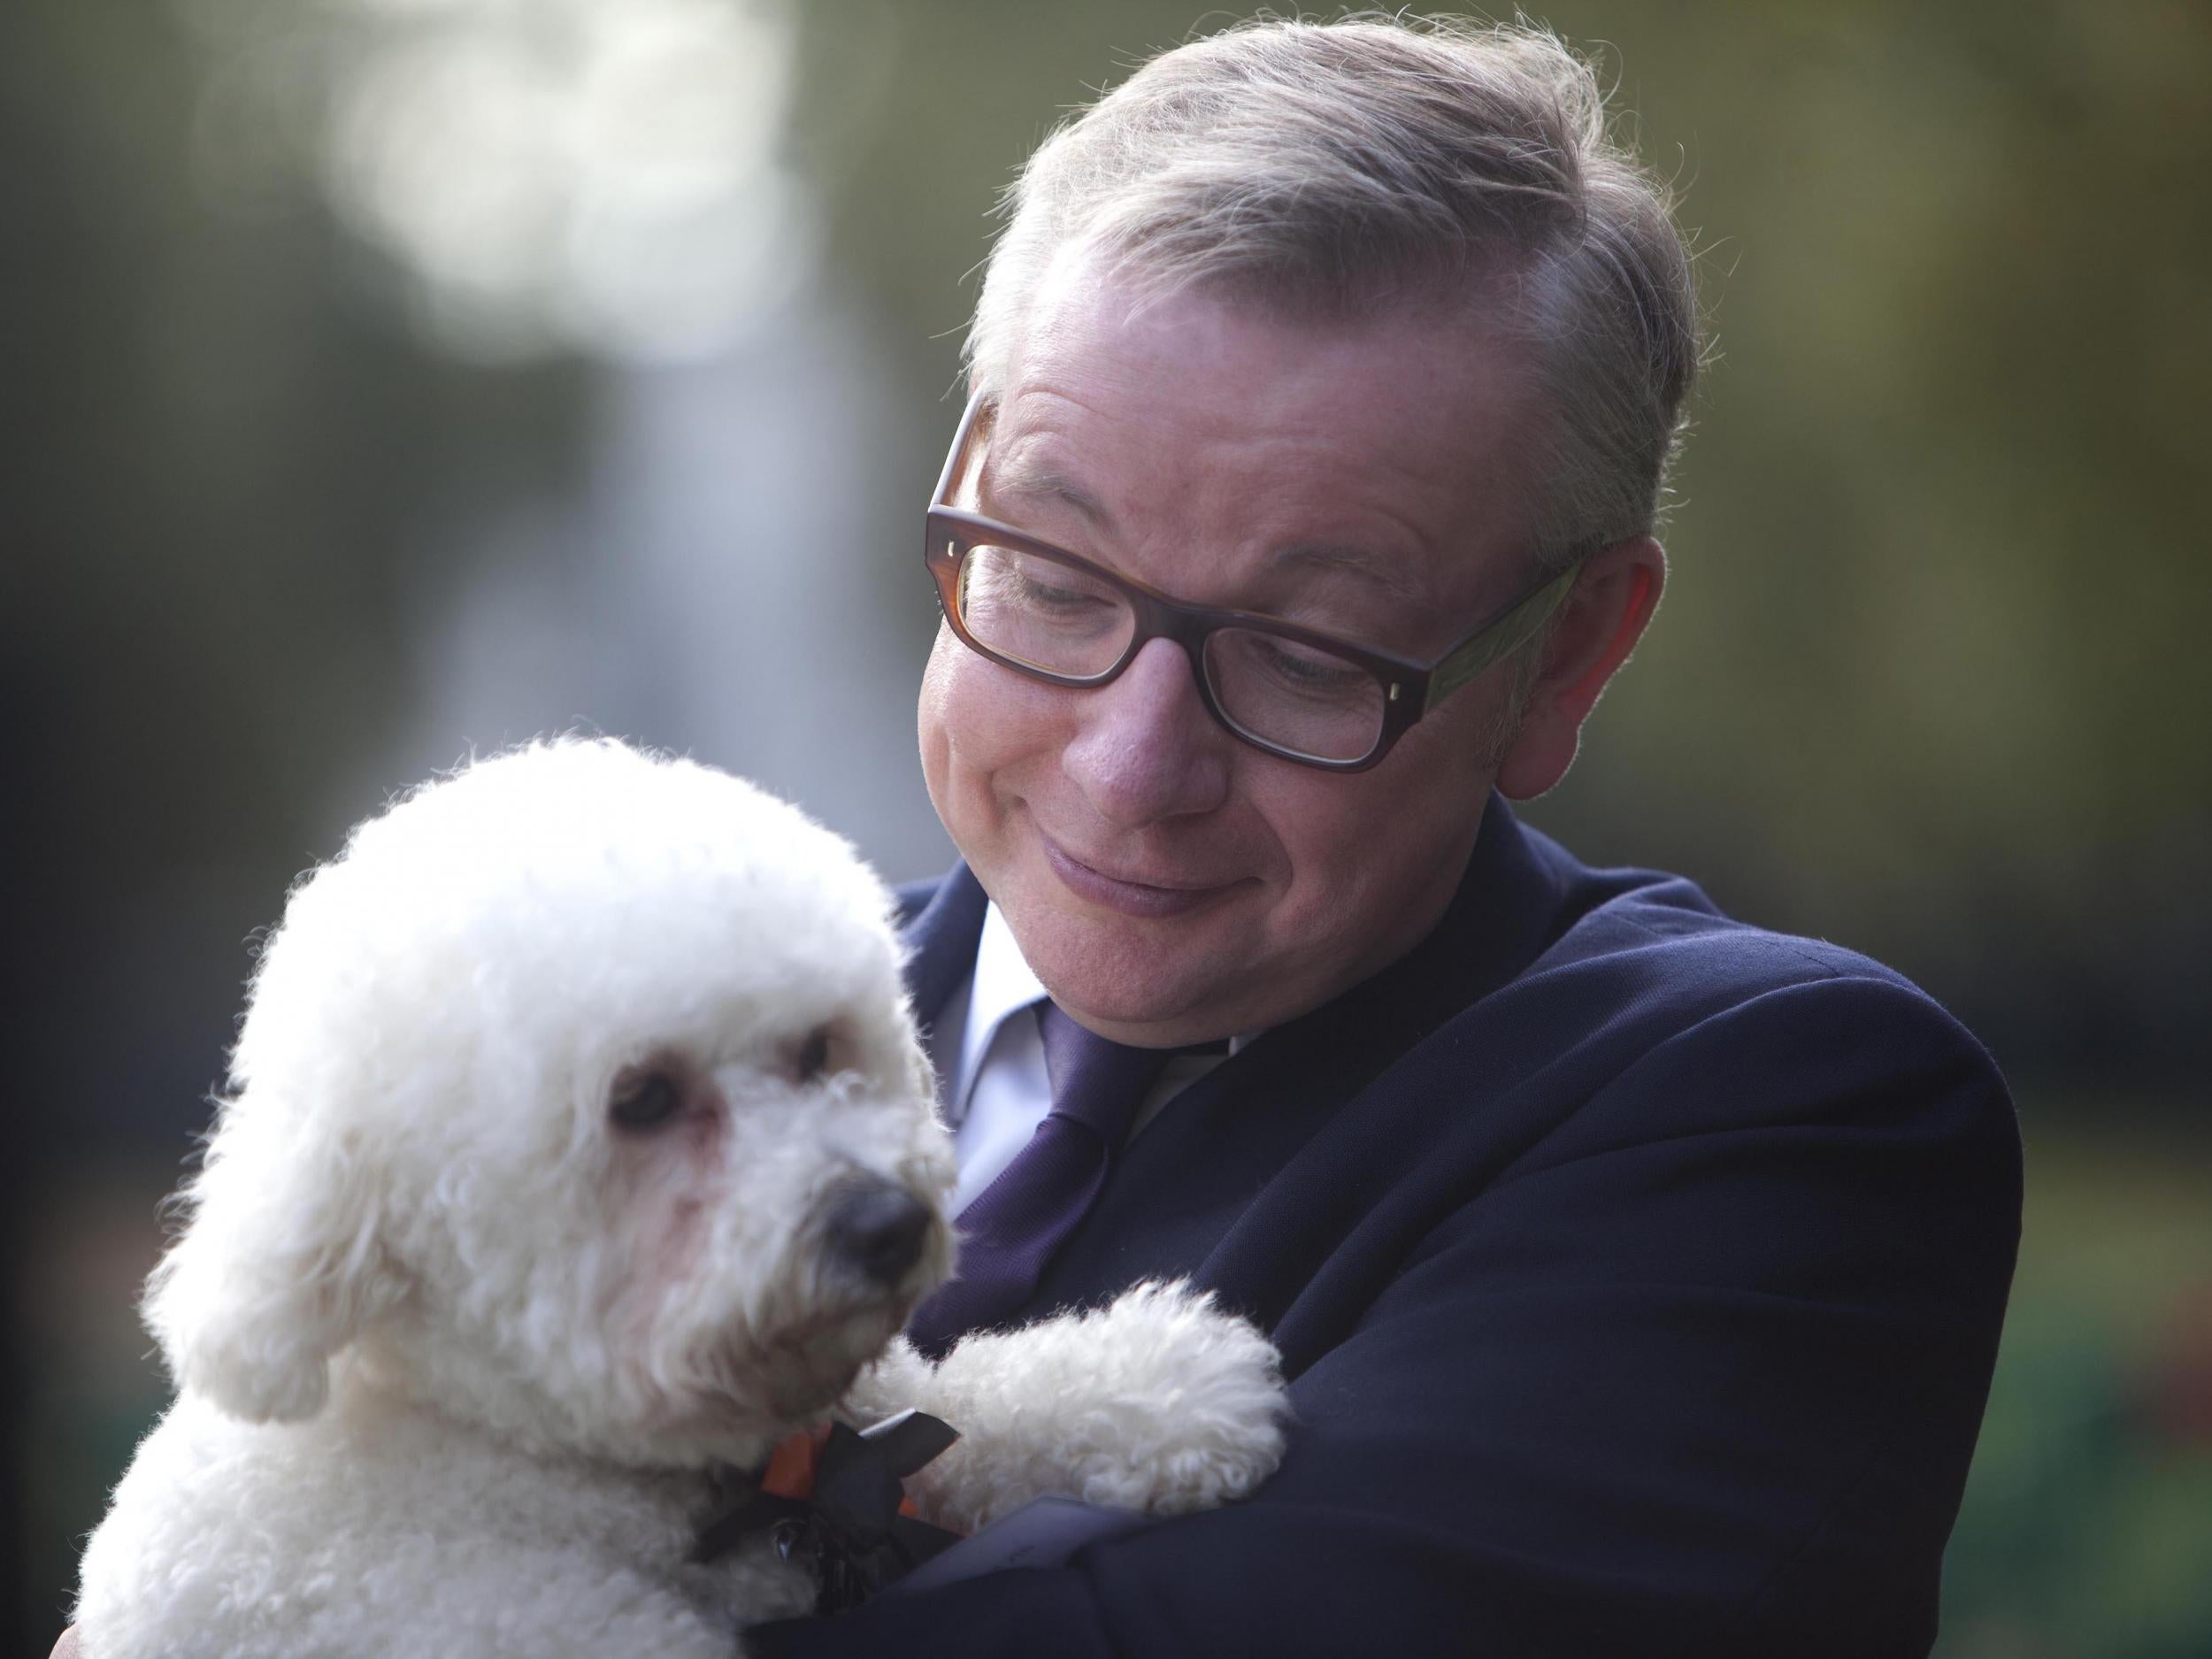 The dog-loving Gove promised tougher penalties for cruelty towards animals, and that Brexit will work ‘not just for citizens but for the animals we love and cherish too’